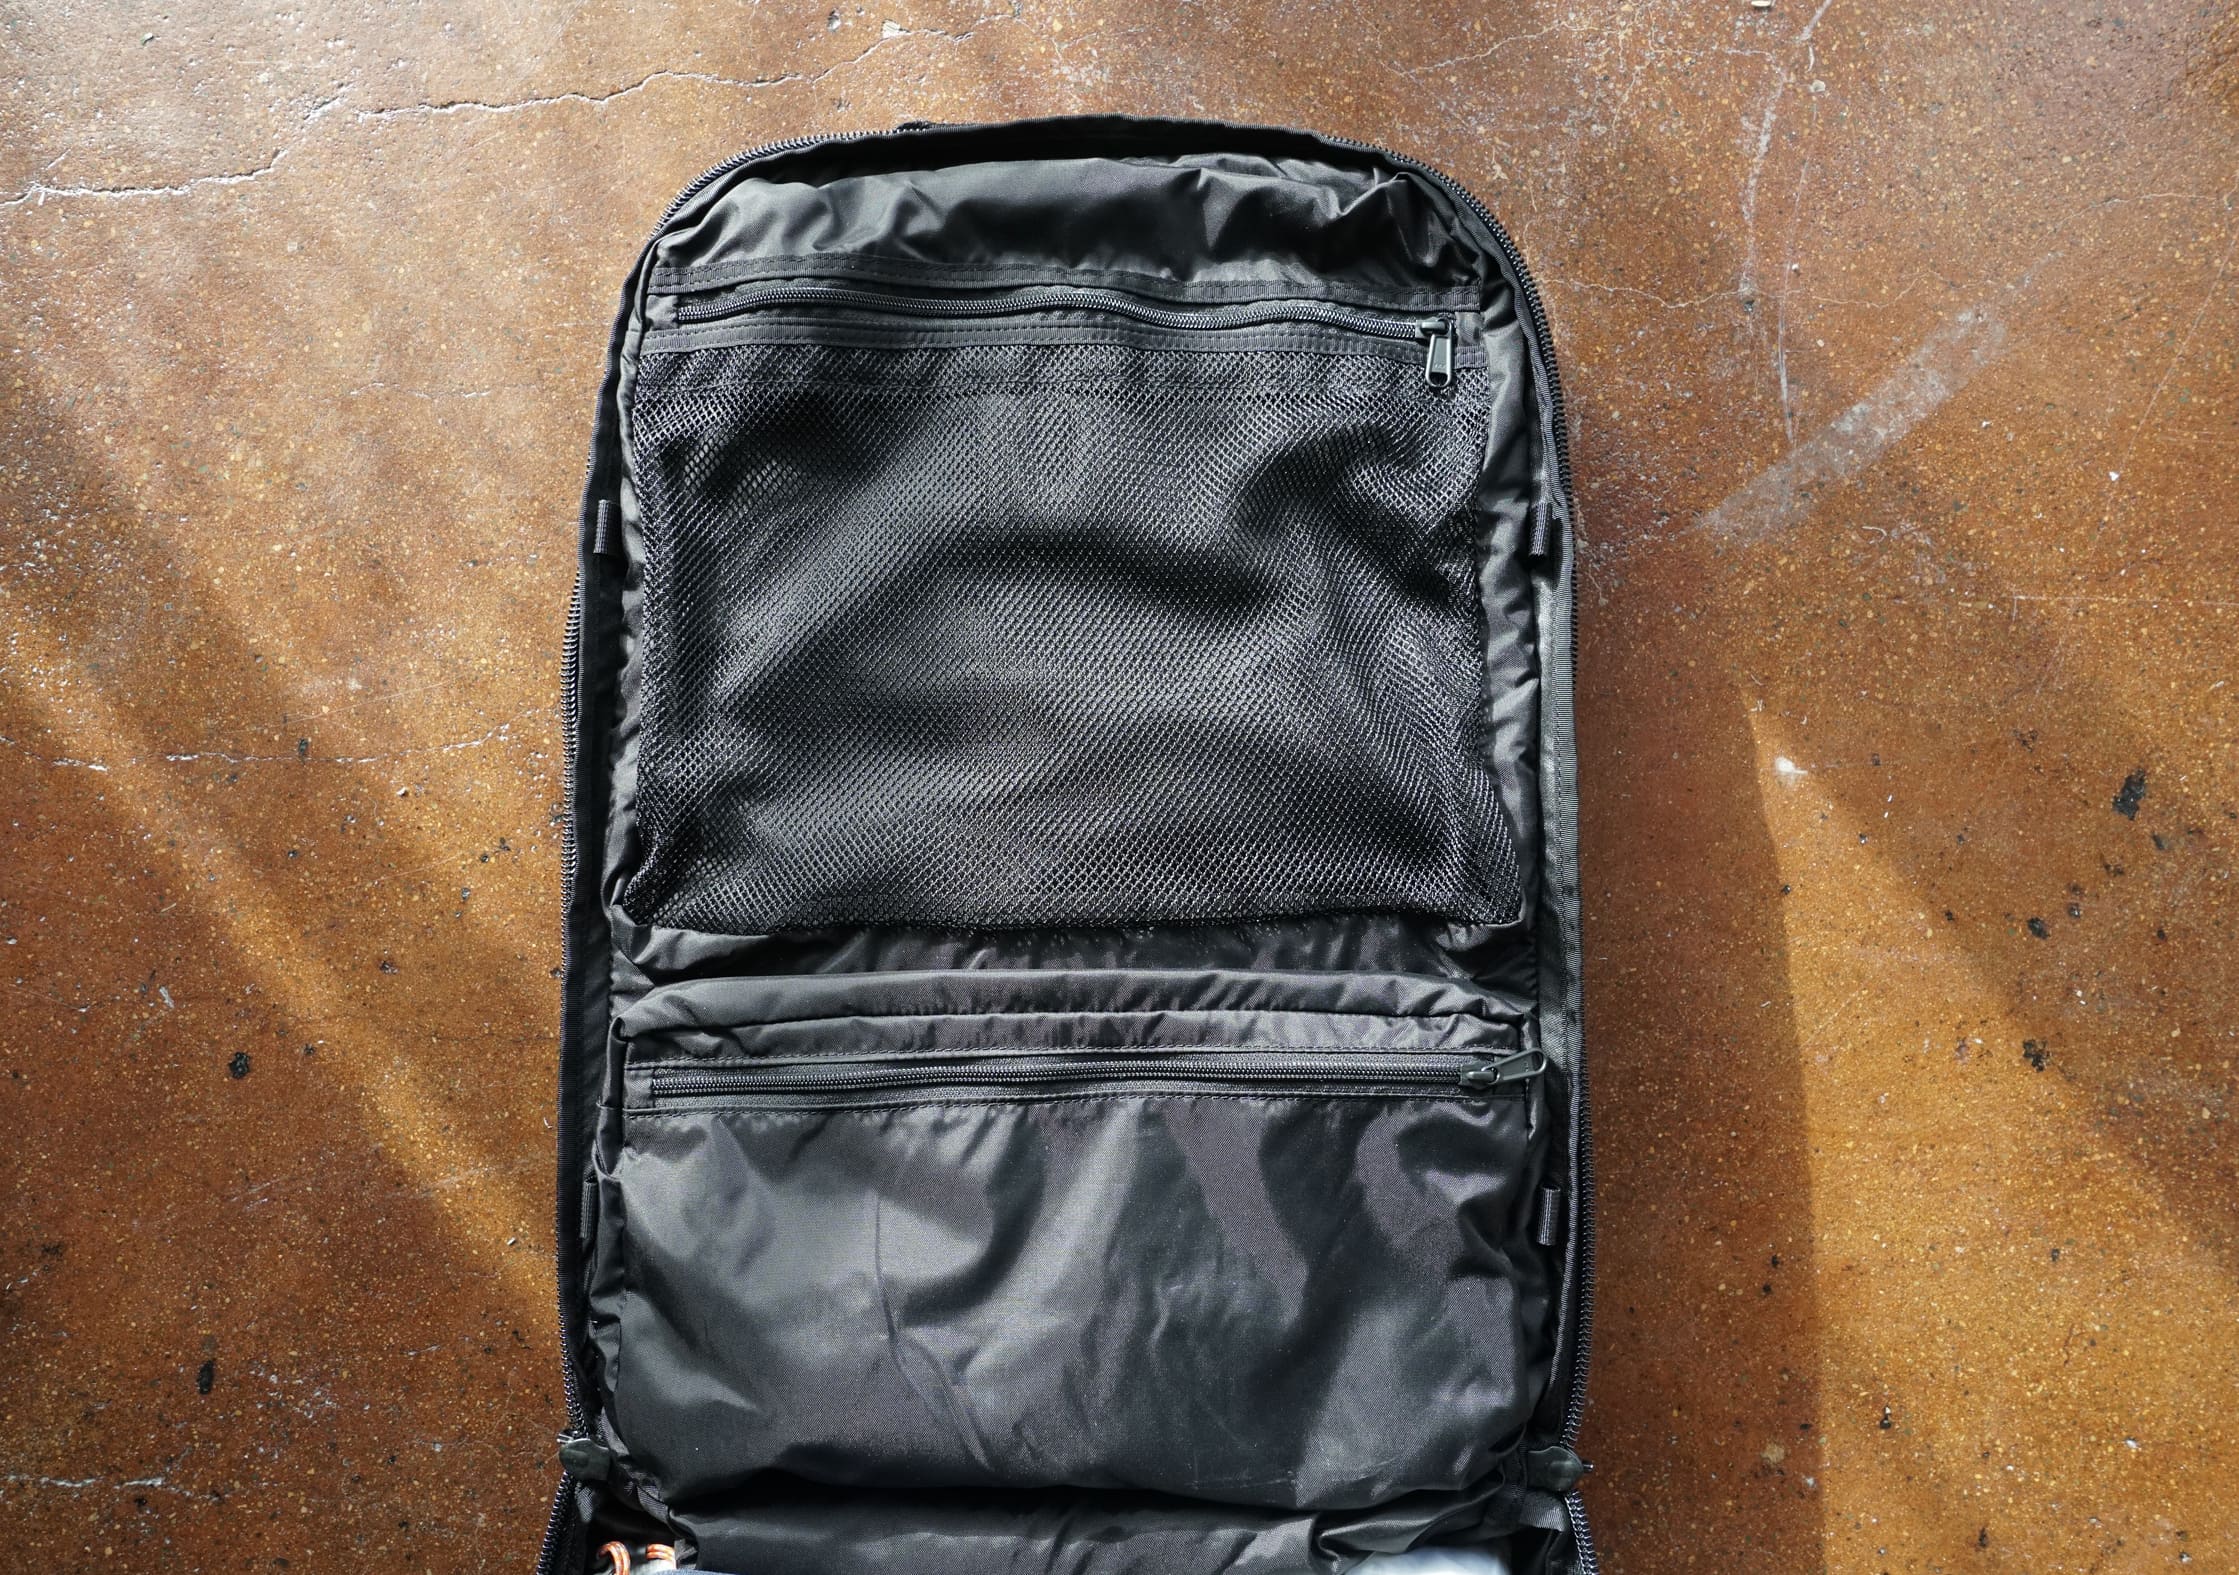 Minaal Carry-on 2.0 Bag Review | Pack Hacker